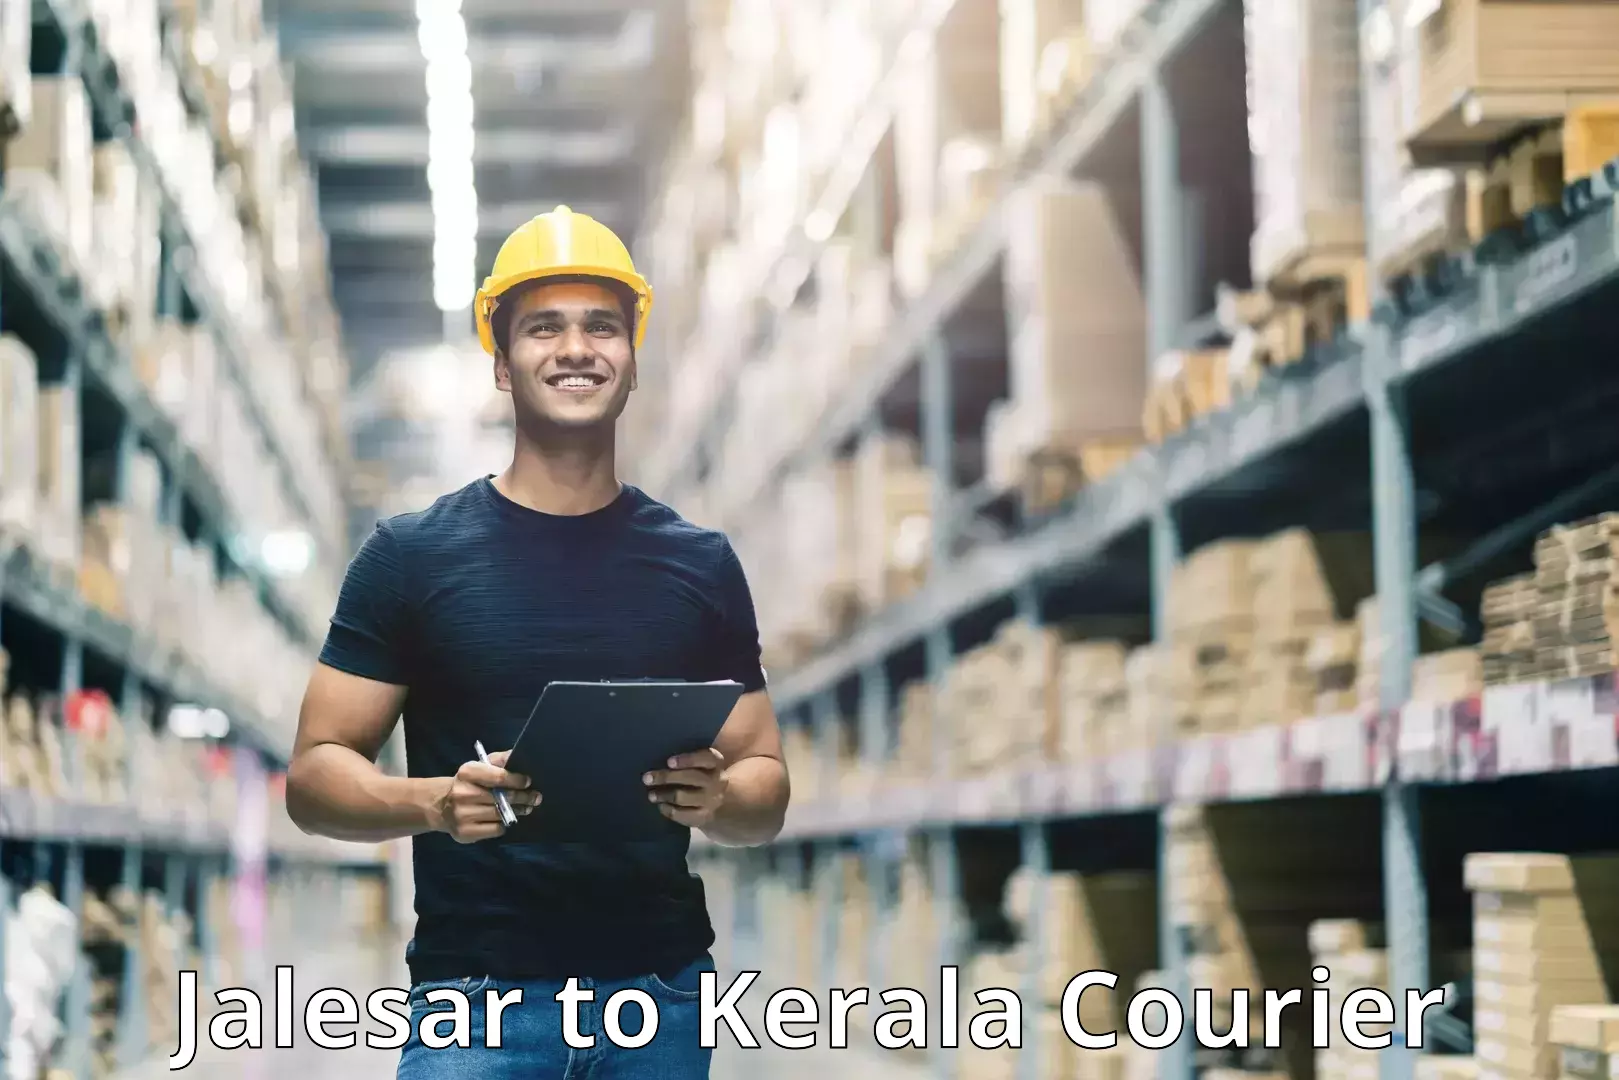 Customer-oriented courier services Jalesar to Kerala